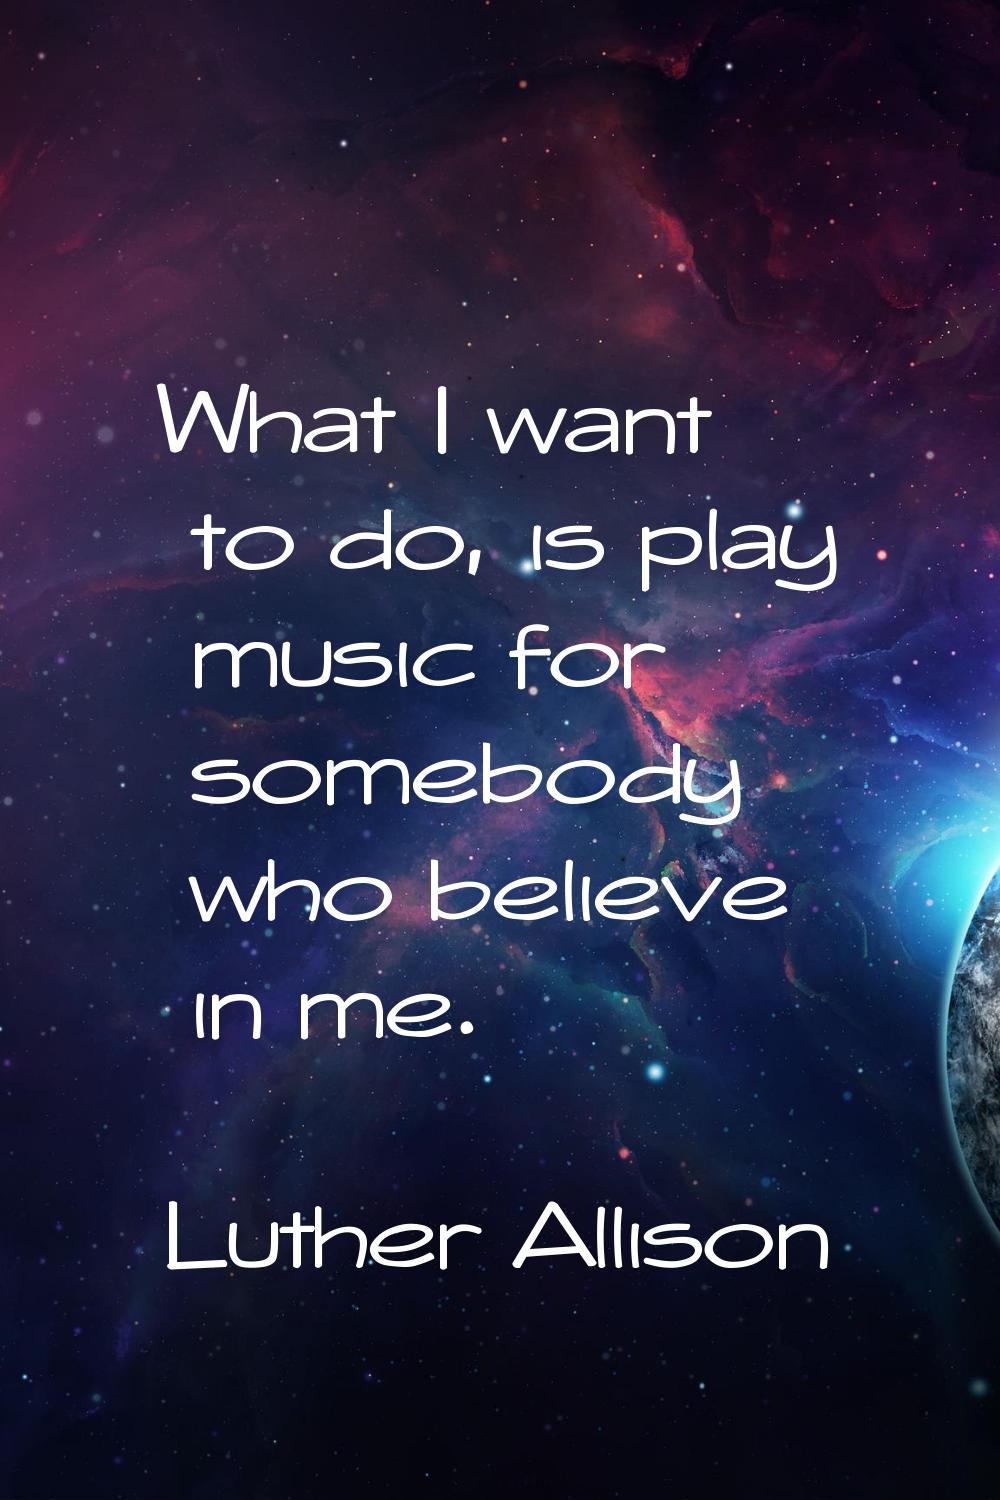 What I want to do, is play music for somebody who believe in me.